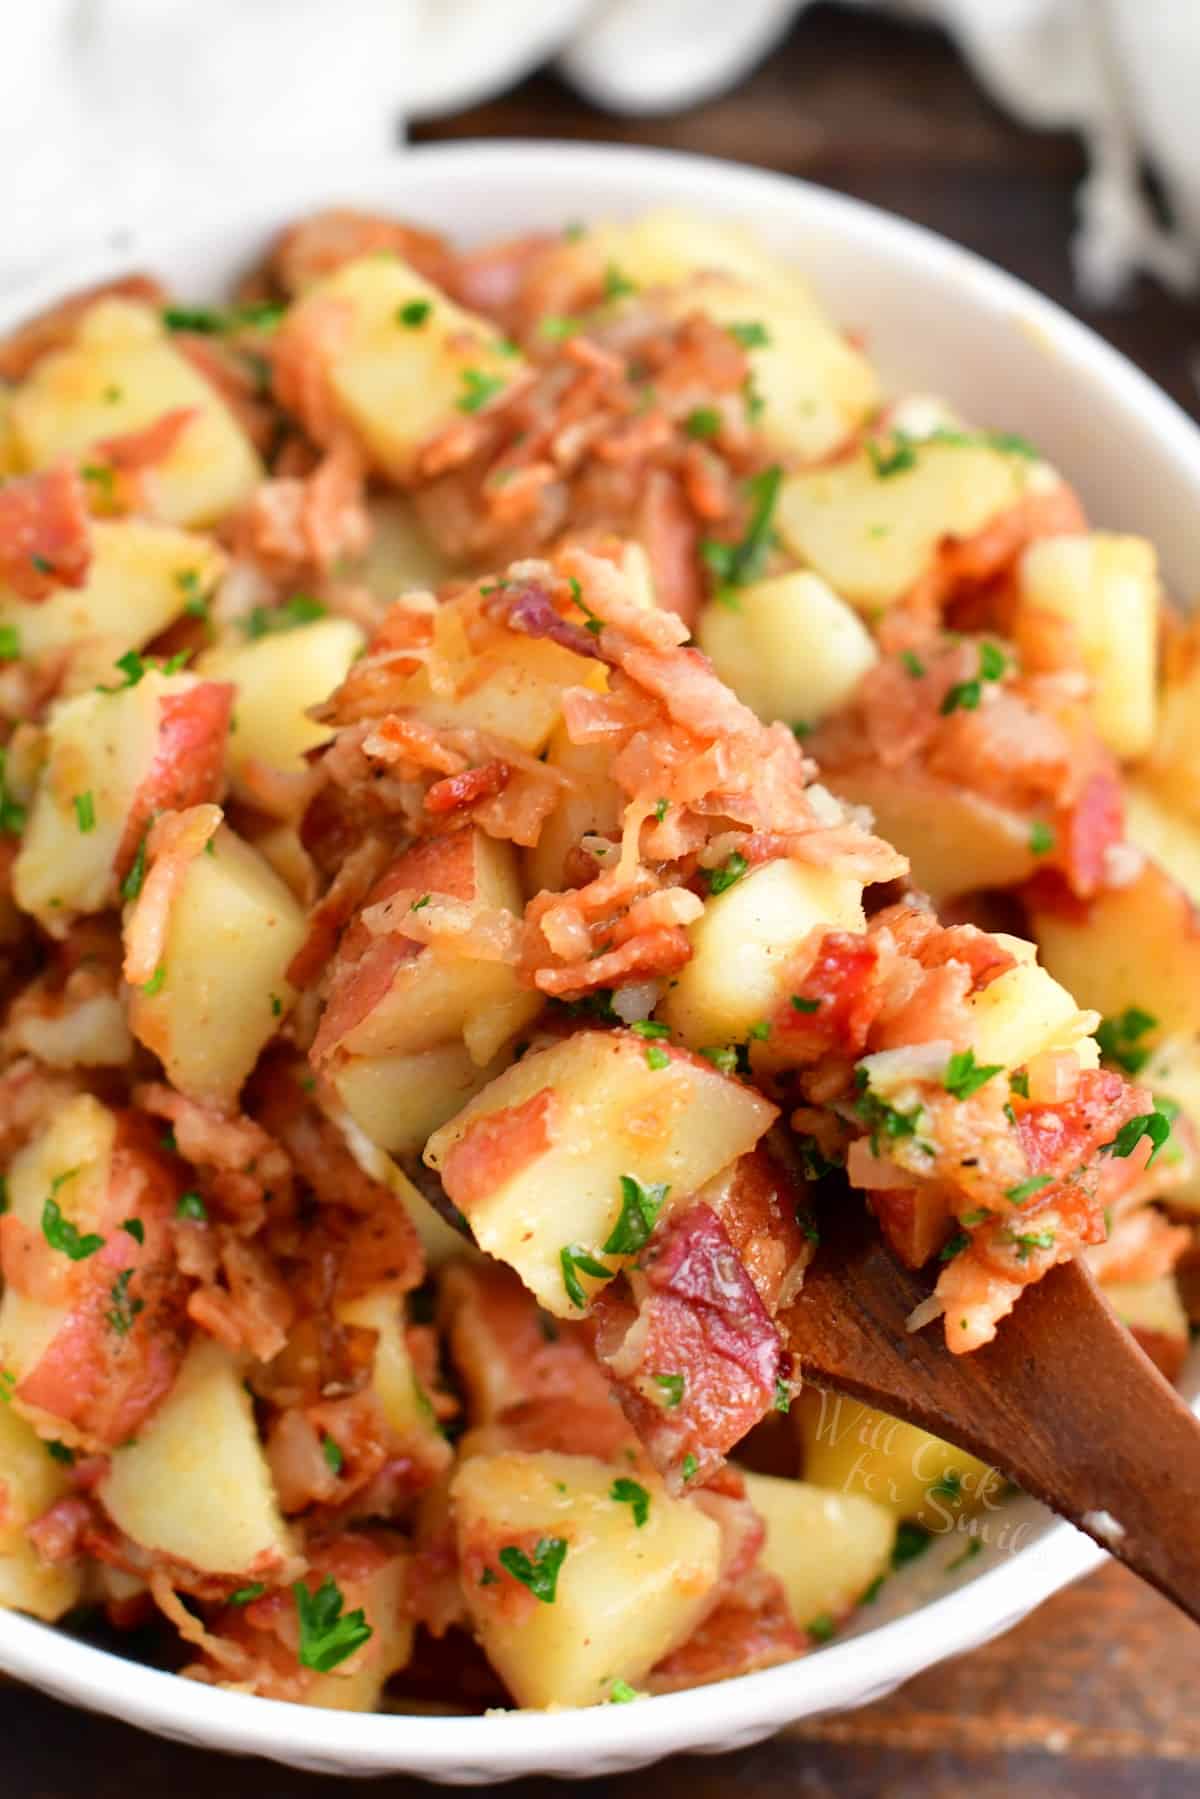 Bacon, parsley, and dressing are tossed with potatoes. 